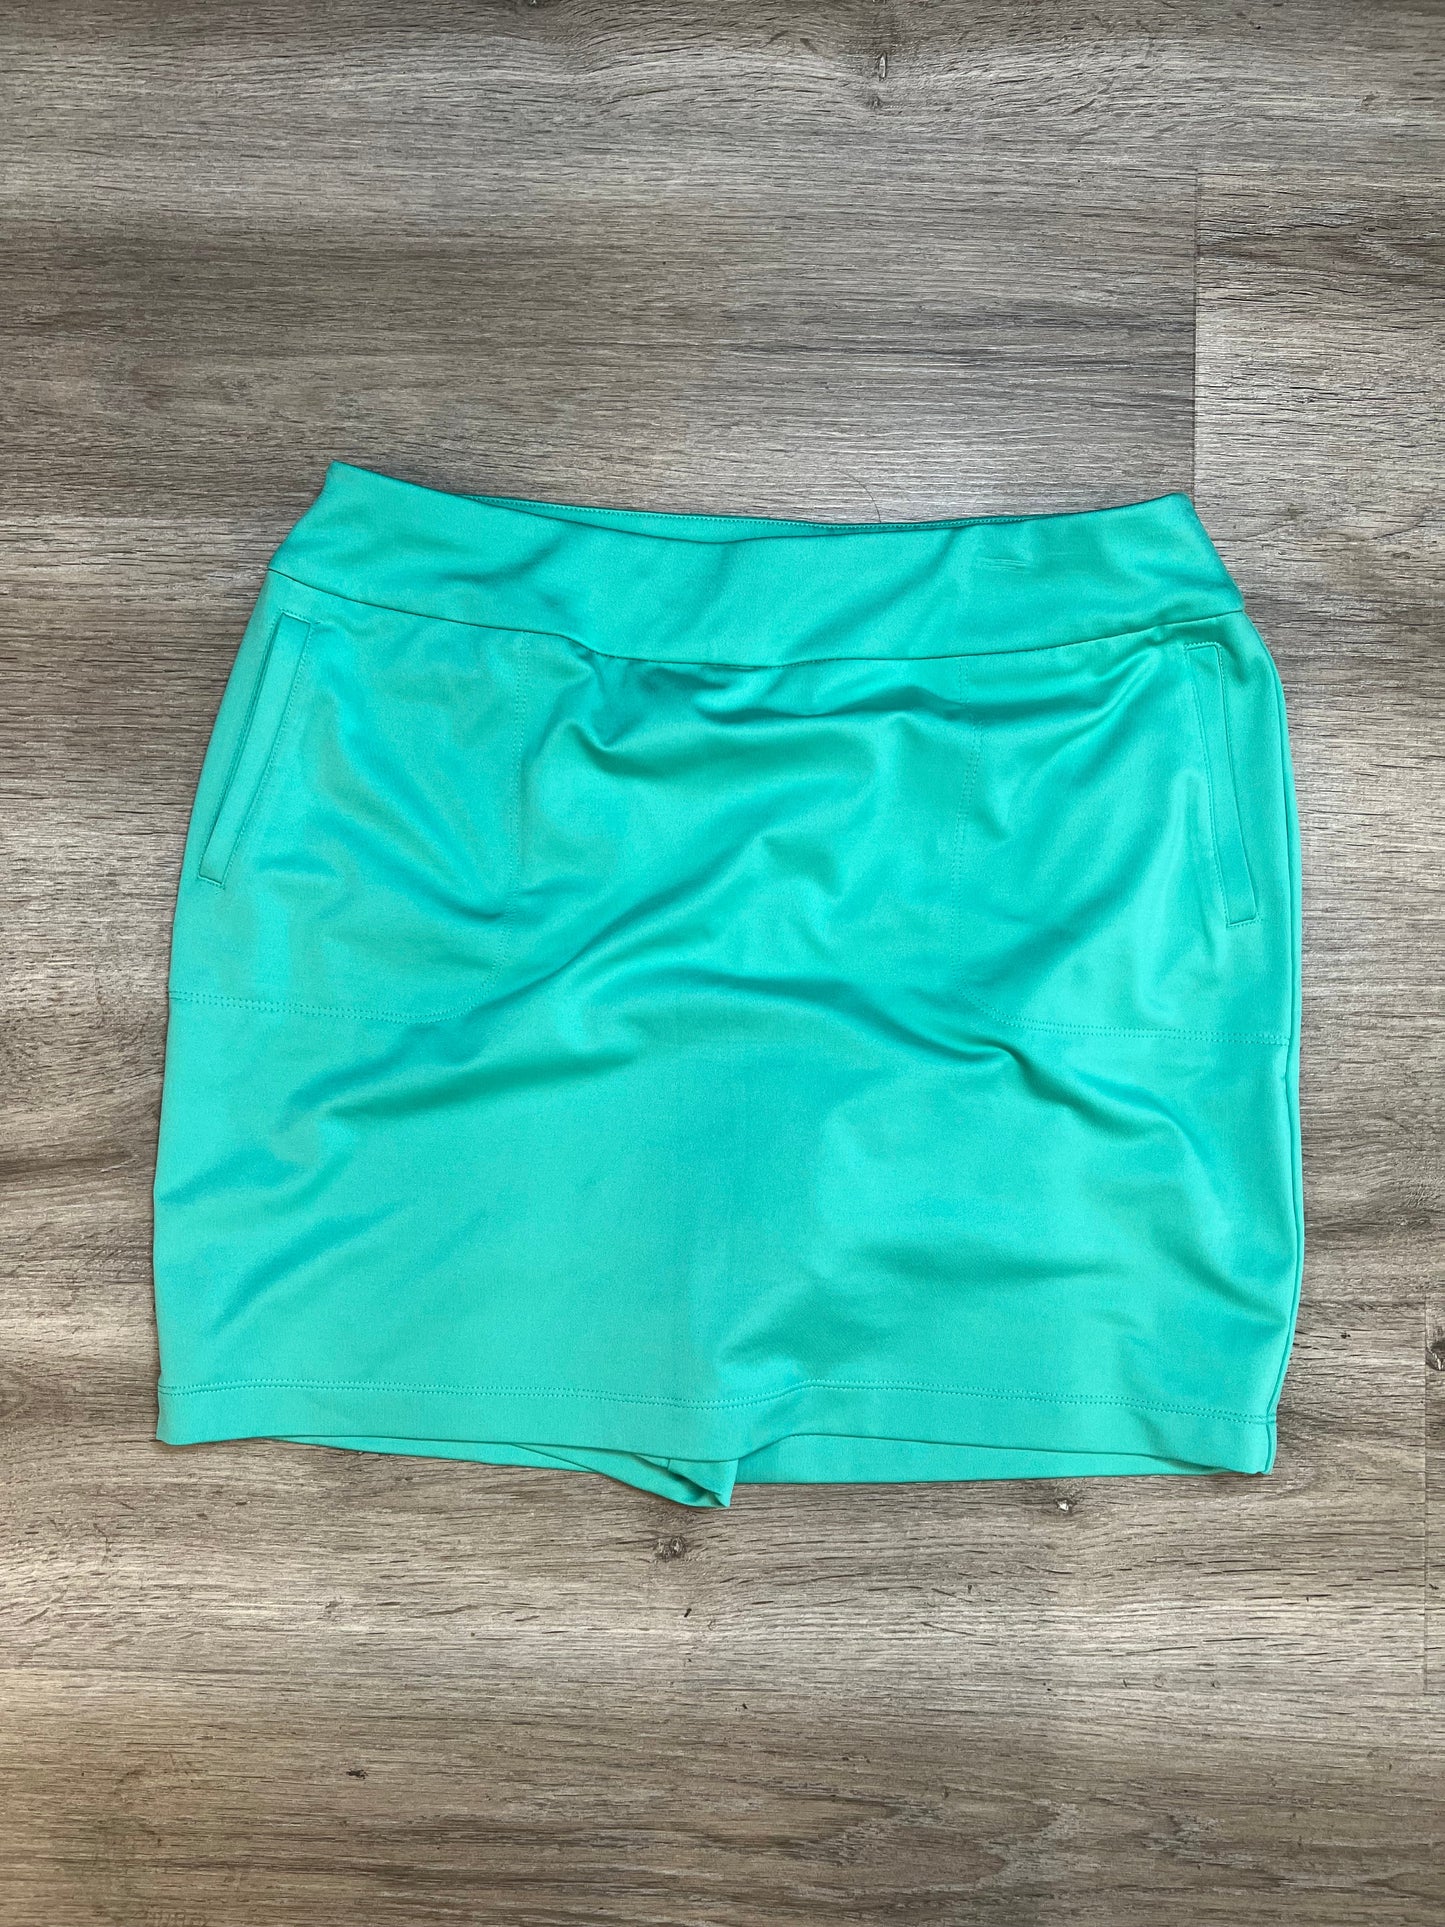 Athletic Skirt Skort By Zenergy By Chicos  Size: M